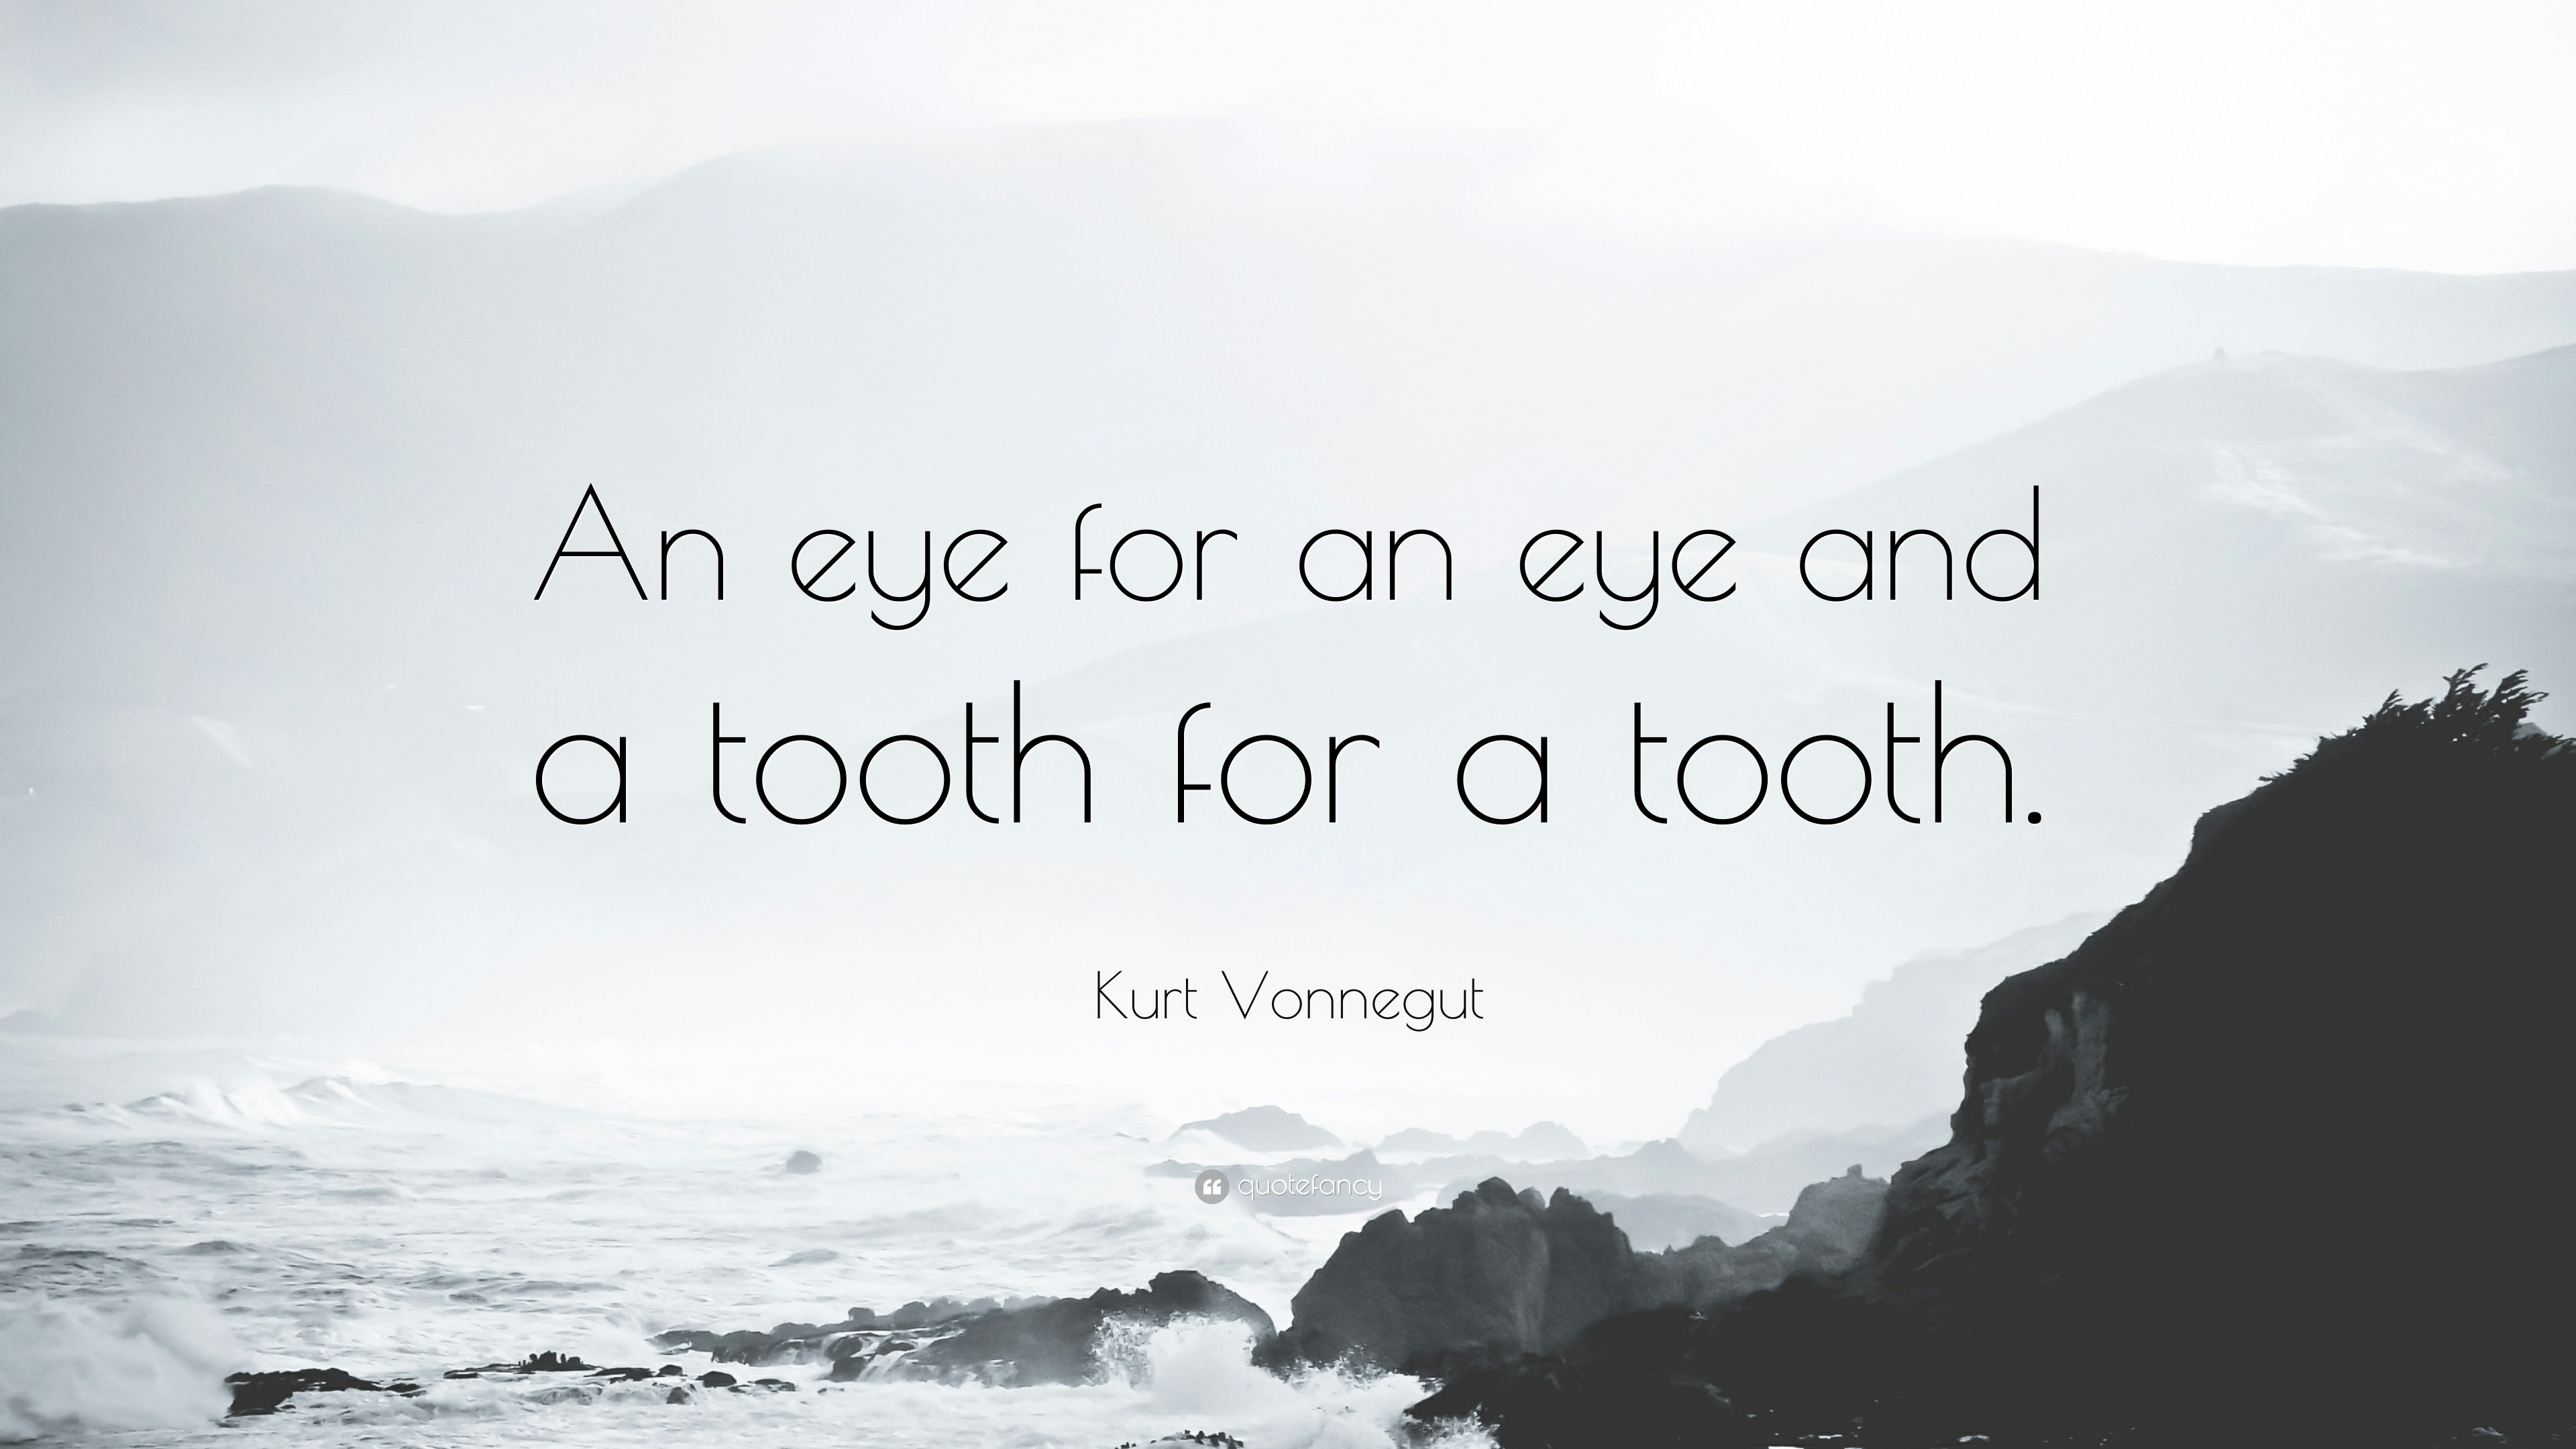 67594-Kurt-Vonnegut-Quote-An-eye-for-an-eye-and-a-tooth-for-a-tooth.jpg